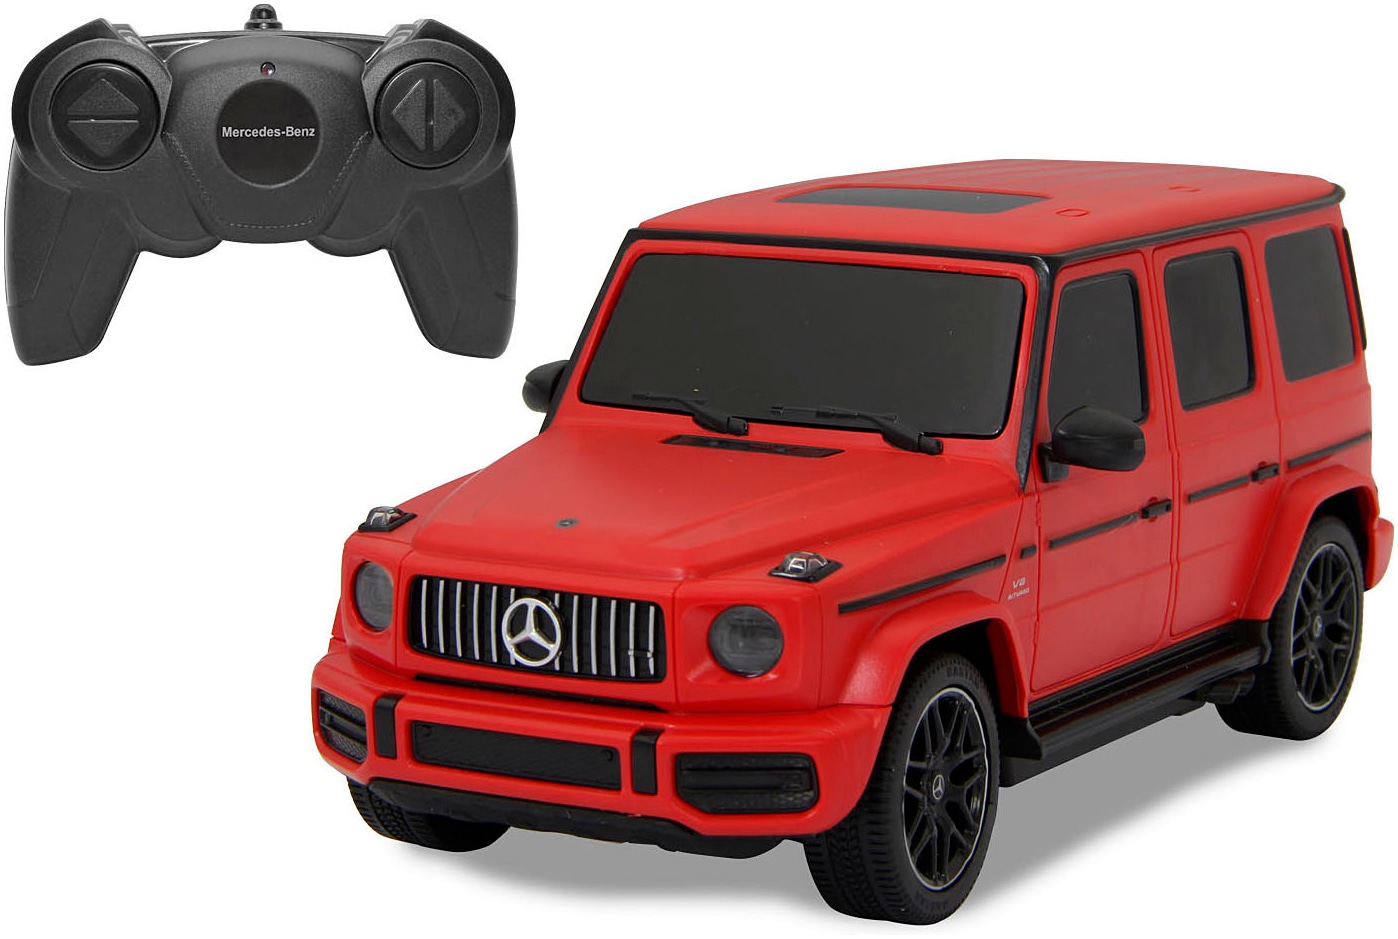 Jamara RC-Auto »Deluxe Cars, Mercedes-AMG G63, 1:24, rot, 2,4GHz«